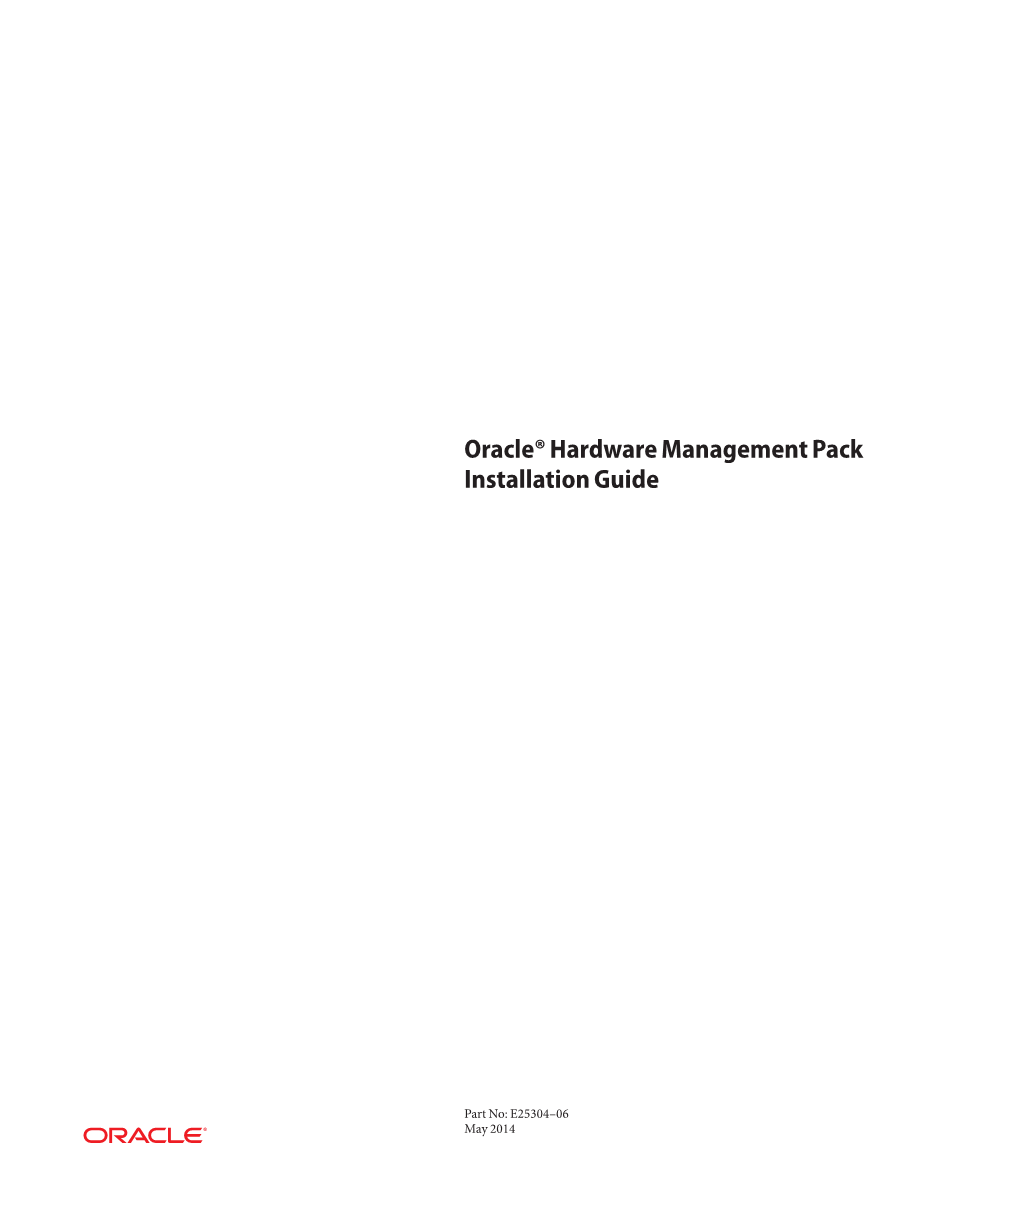 Oracle Hardware Management Pack Installation Guide Overview